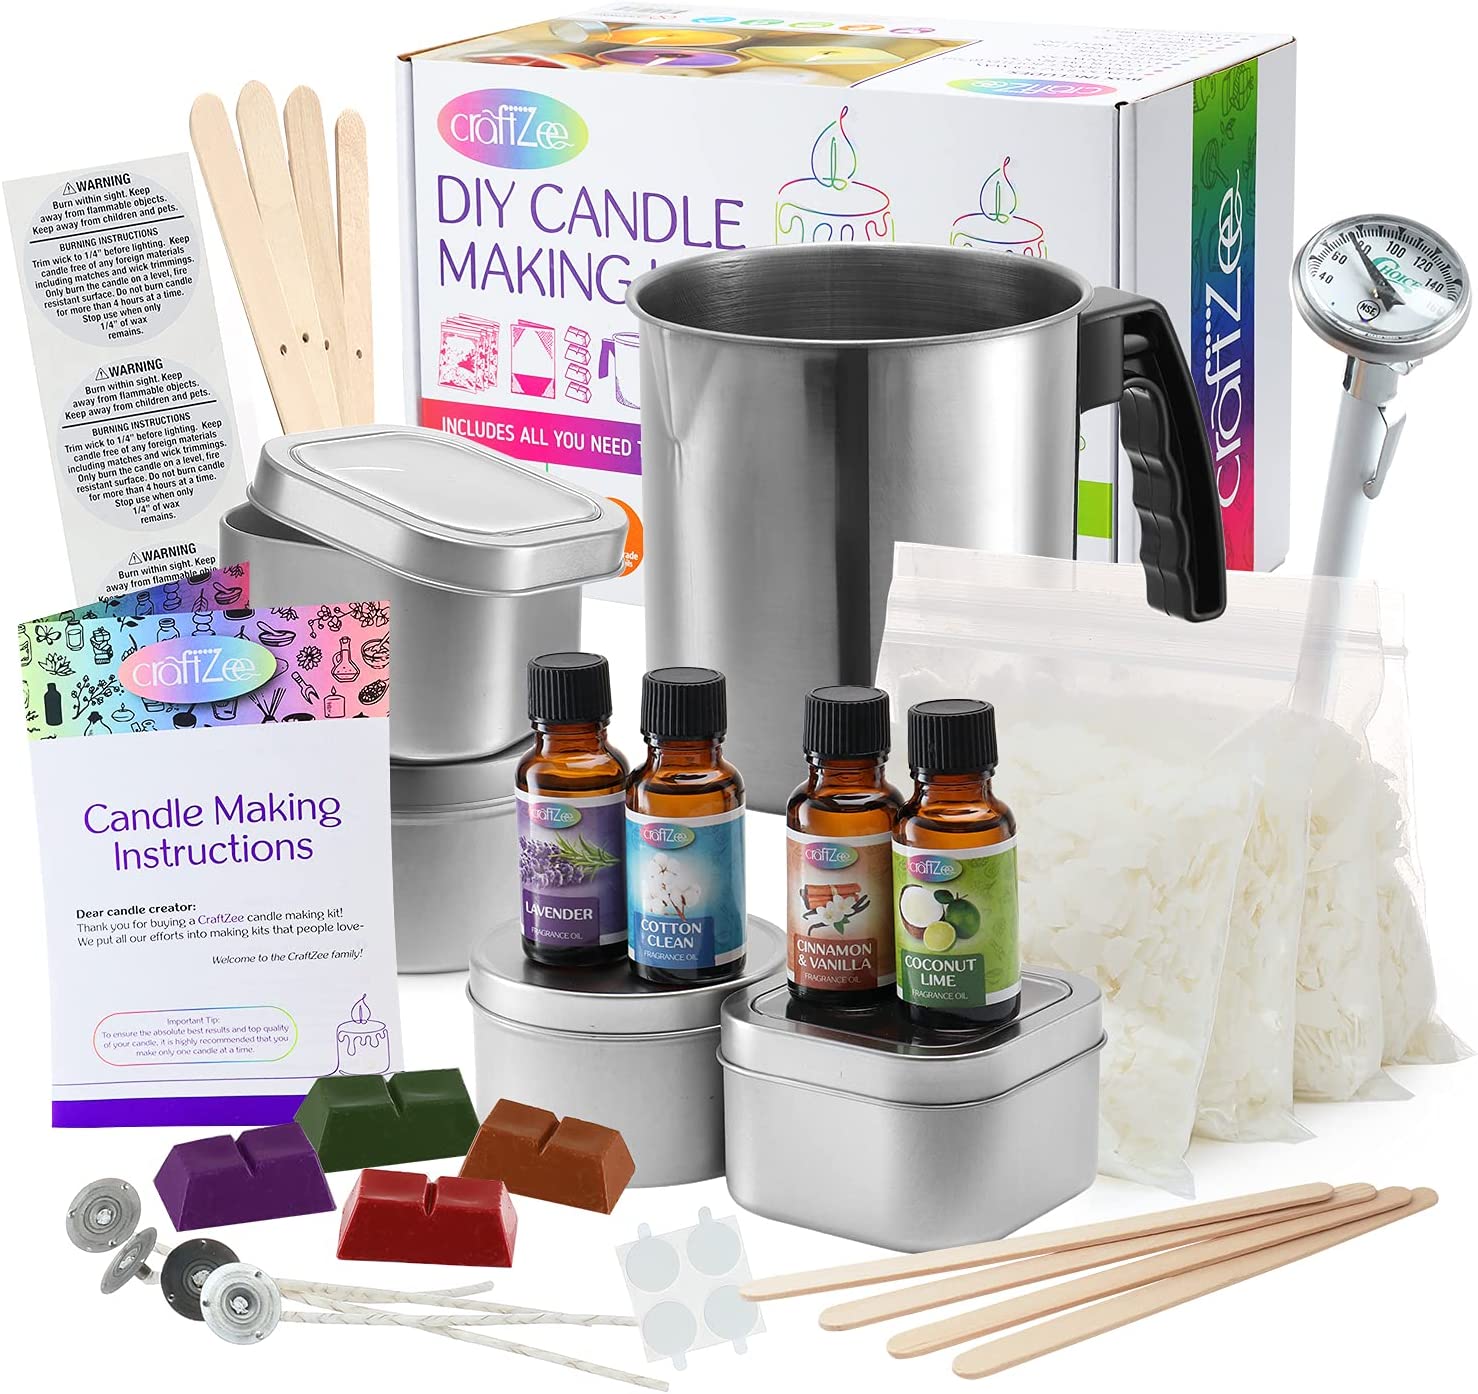 CraftZee Candle Making Kit | DIY Home Decor, Office Decor, Art, Crafts | Includes 4 Soy Wax Bag, 4 Fragrance Oil, 4 Candle Molds | Birthday Gifts for Women, House Warming Gifts New Home